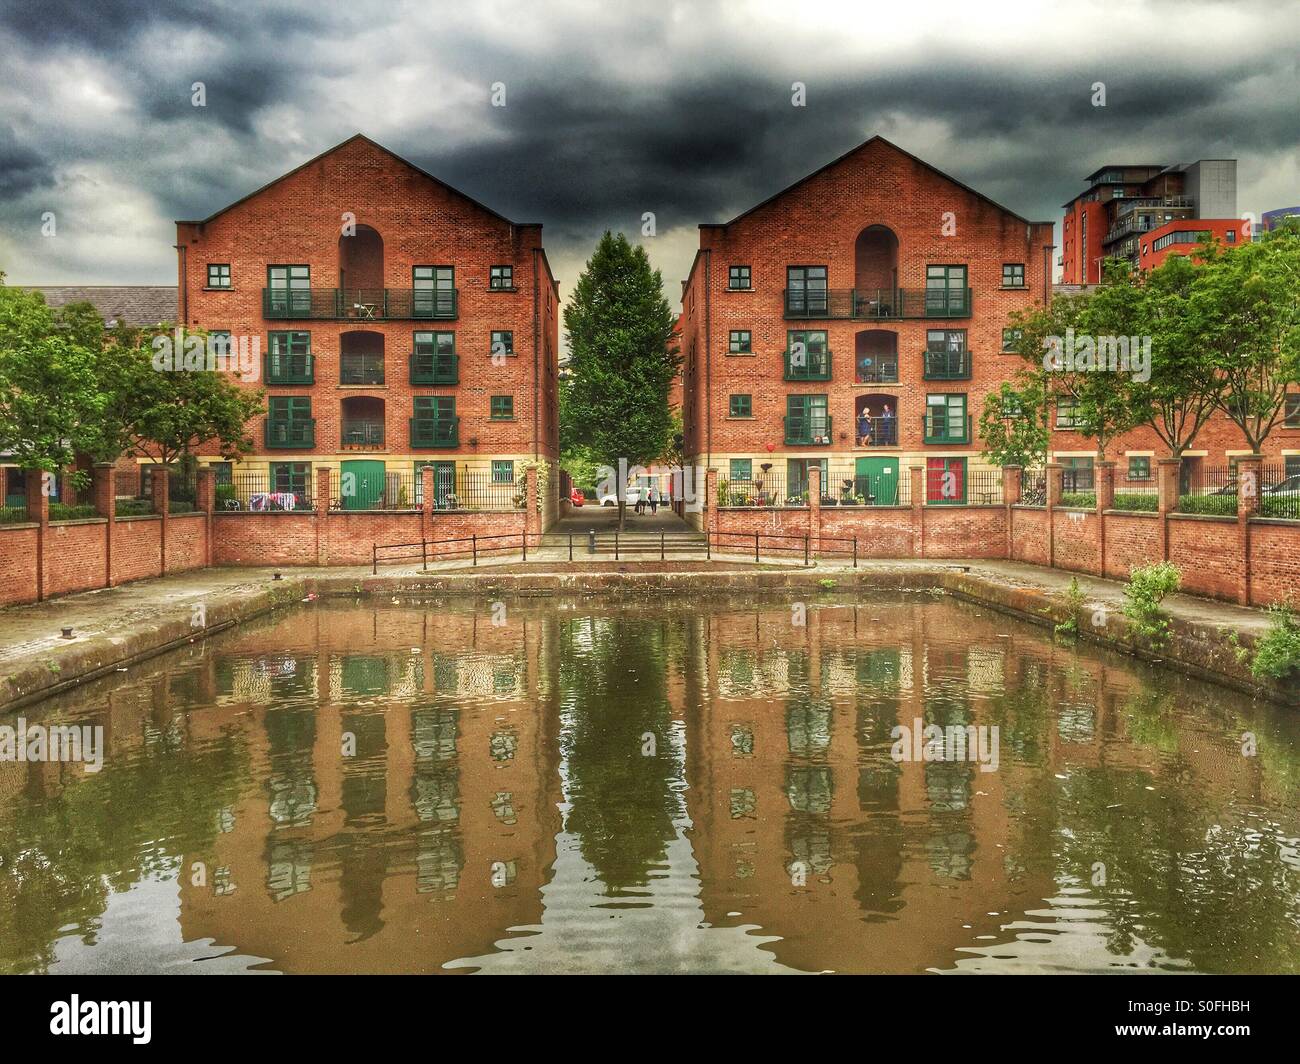 Rentable Accomodation in Castlefield, manchester Stock Photo